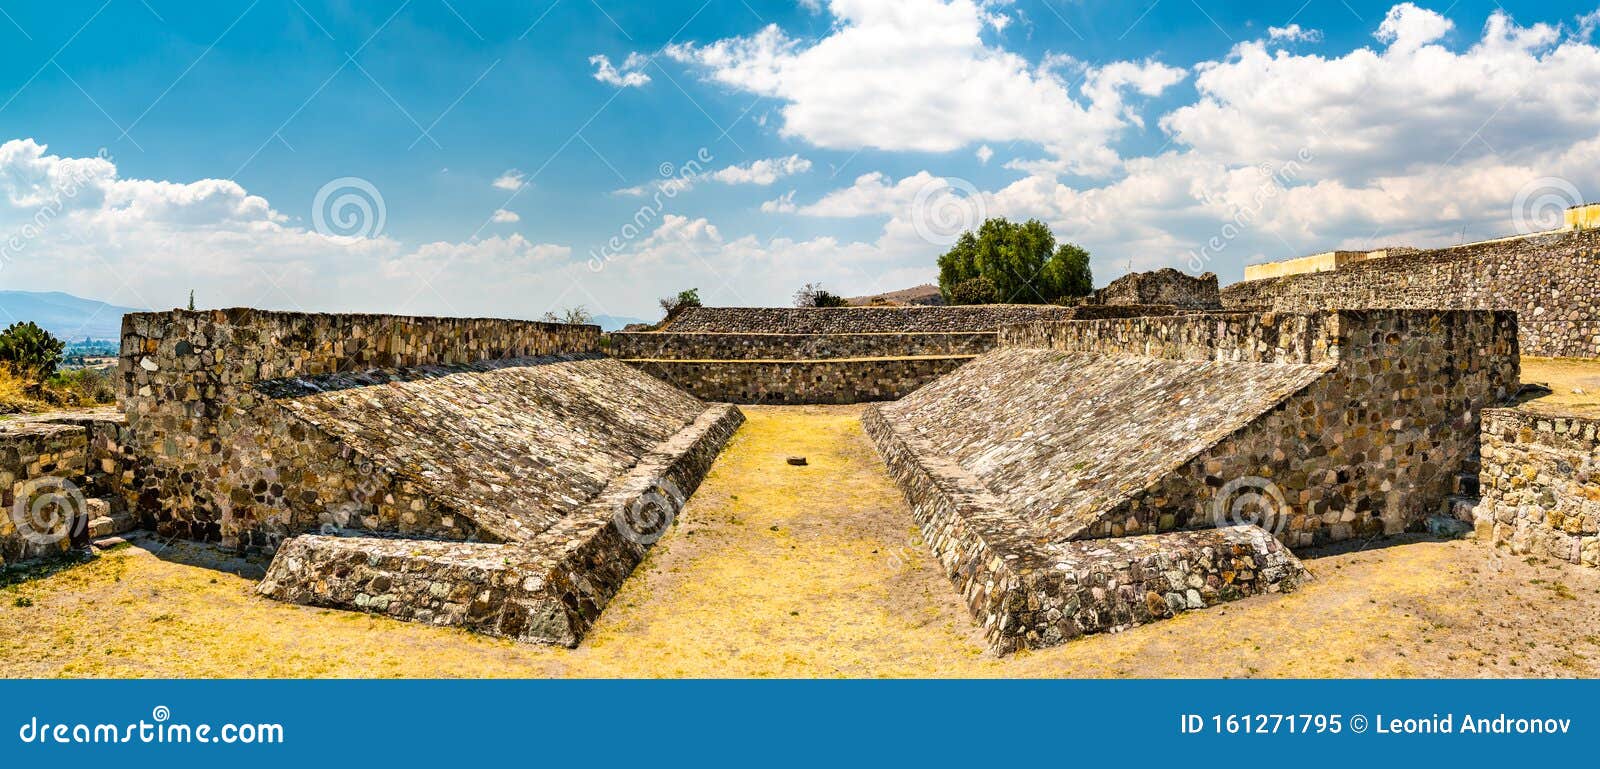 ballcourt at the yagul archaeological site in mexico